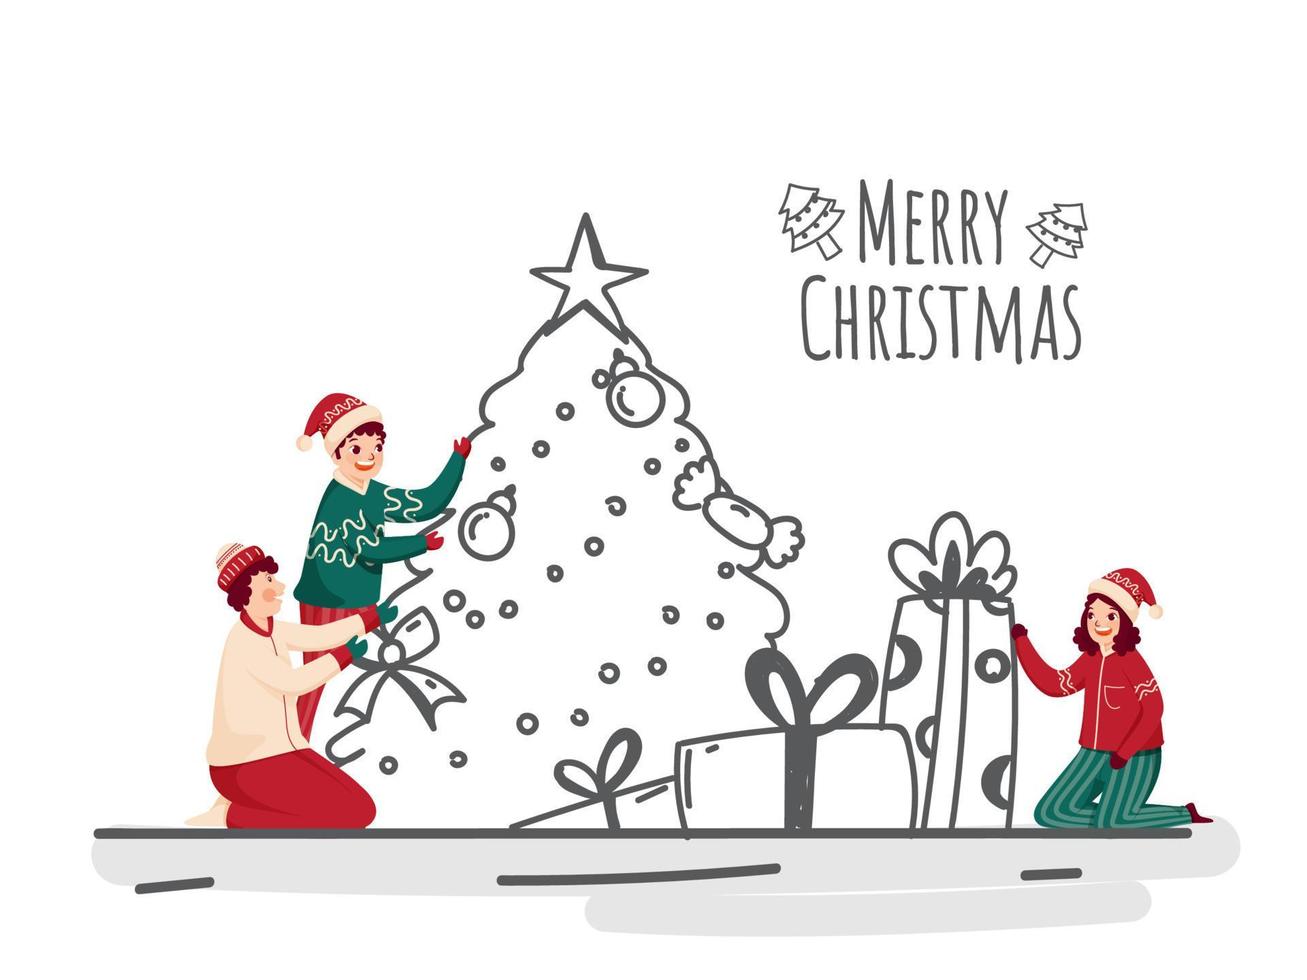 Merry Christmas Poster Design with Cheerful Kids Character, Doodle Style Decorative Xmas Tree and Gift Boxes on White Background. vector